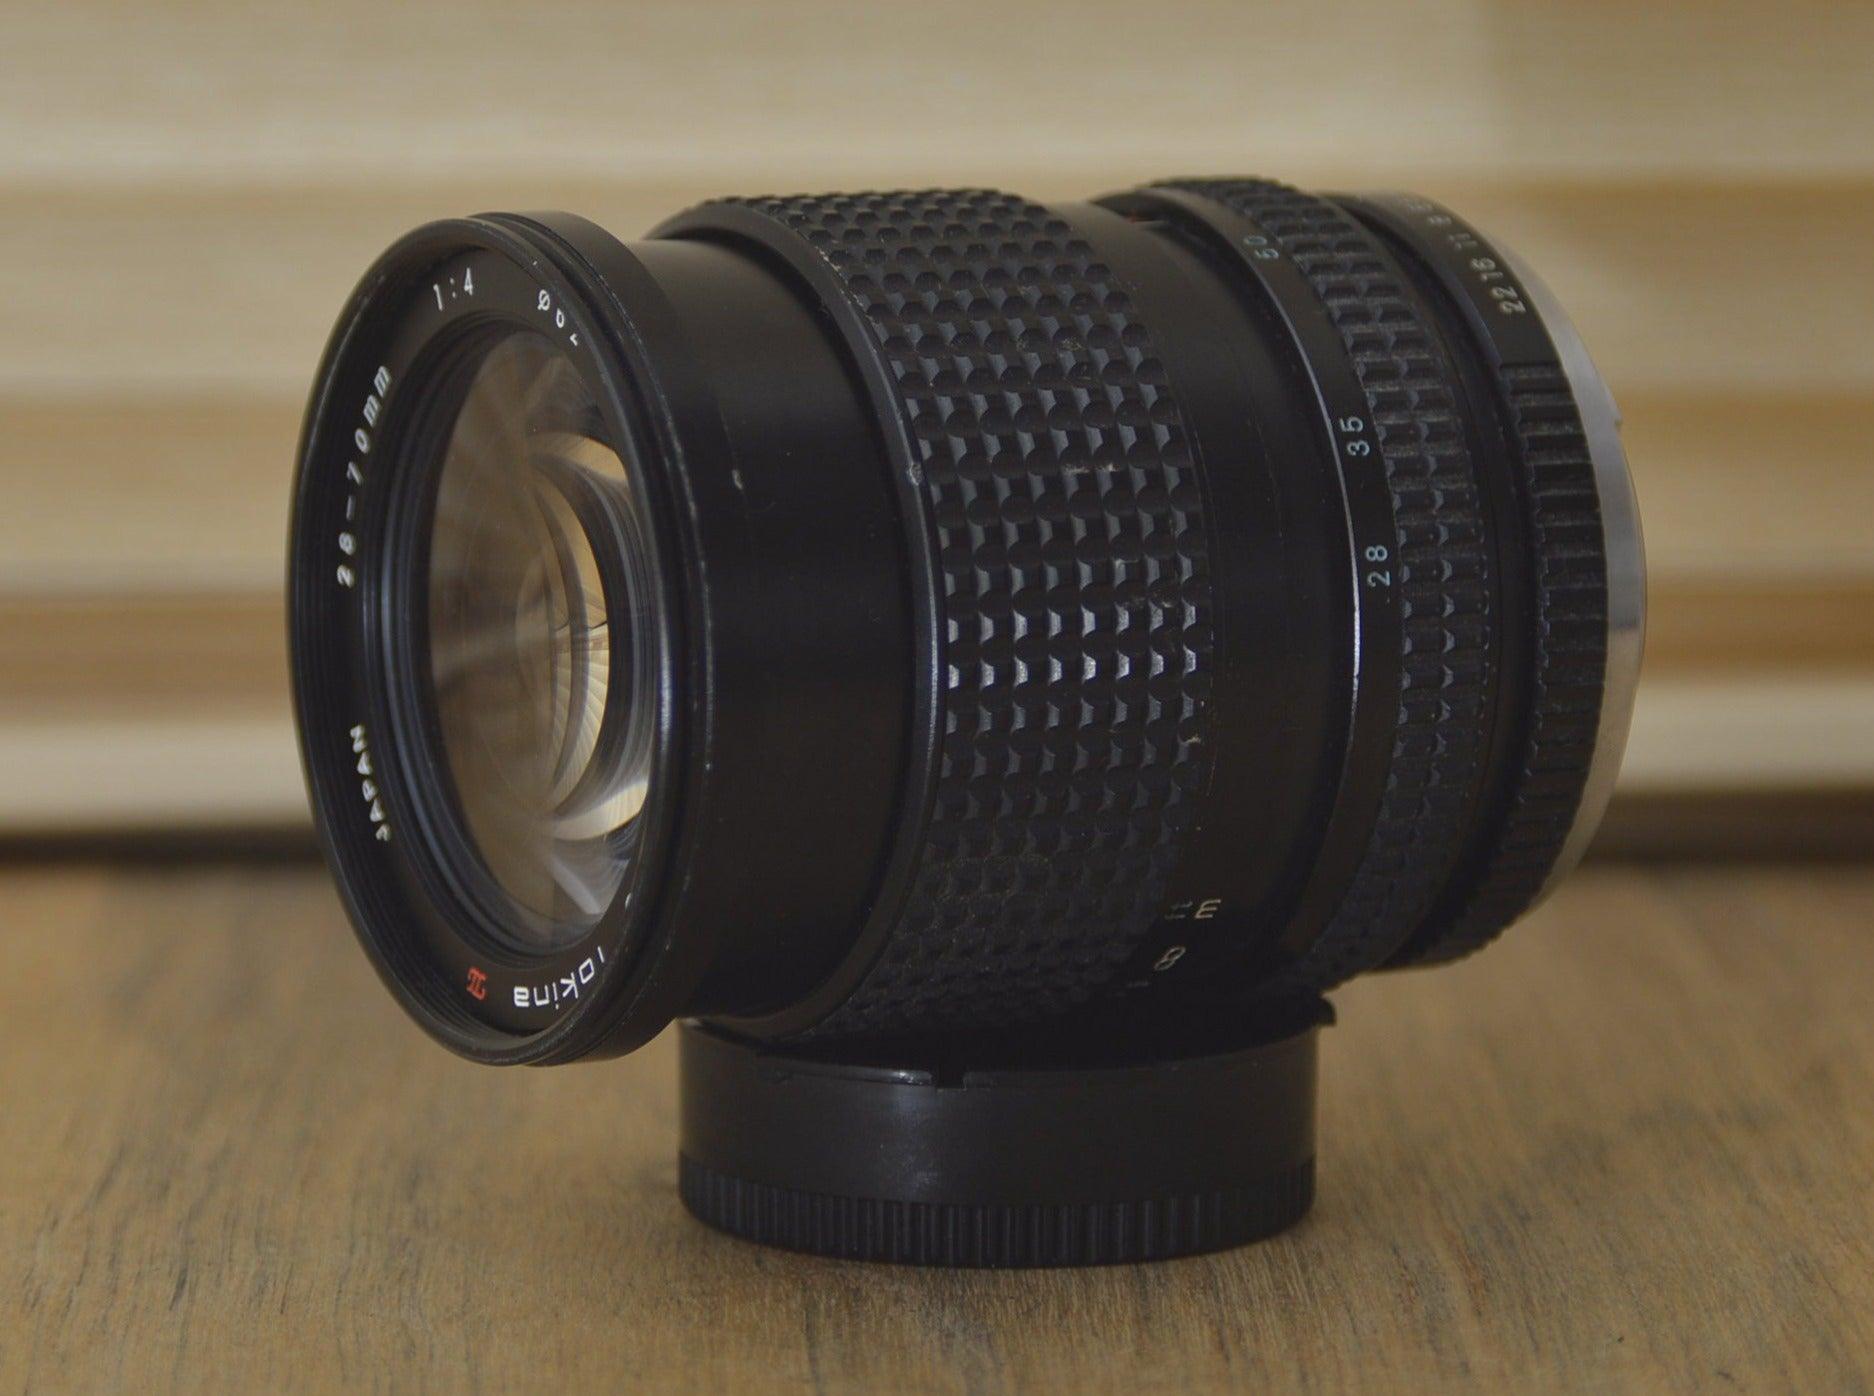 Lovely Tokina 28-70mm f4 Pentax k mount Lens. A sharp lens for portraiture through to wildlife photography. Clean and sharp optics - RewindCameras quality vintage cameras, fully tested and se